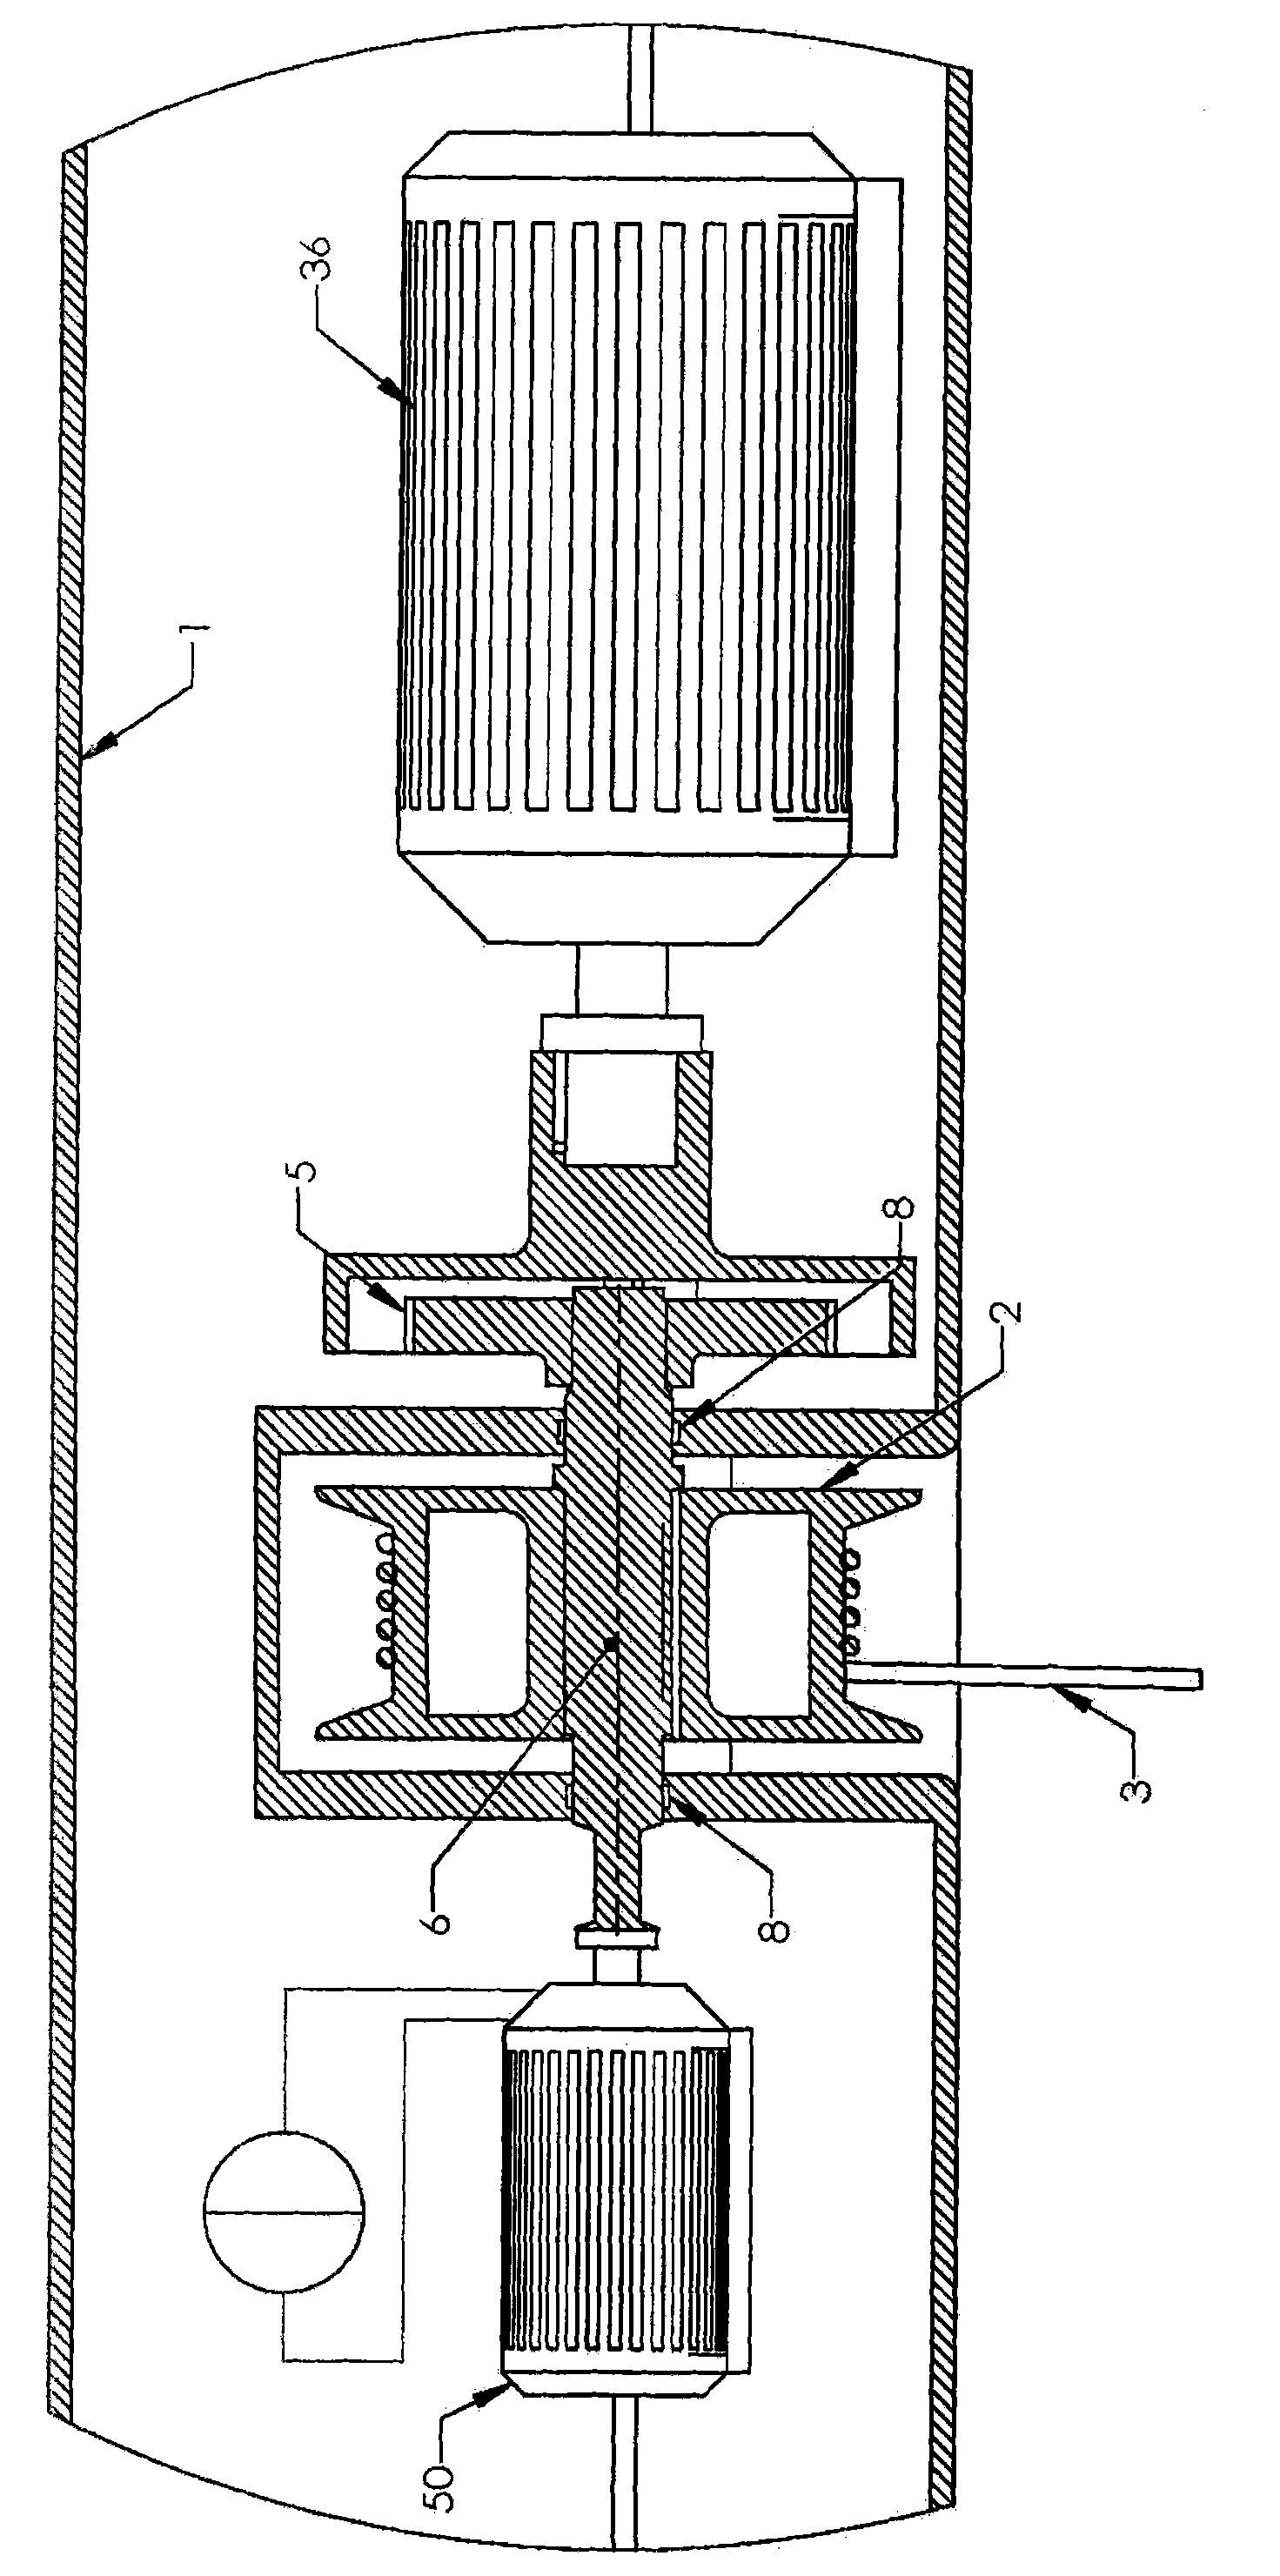 Wave power generating system with floating-body-based rope pulley